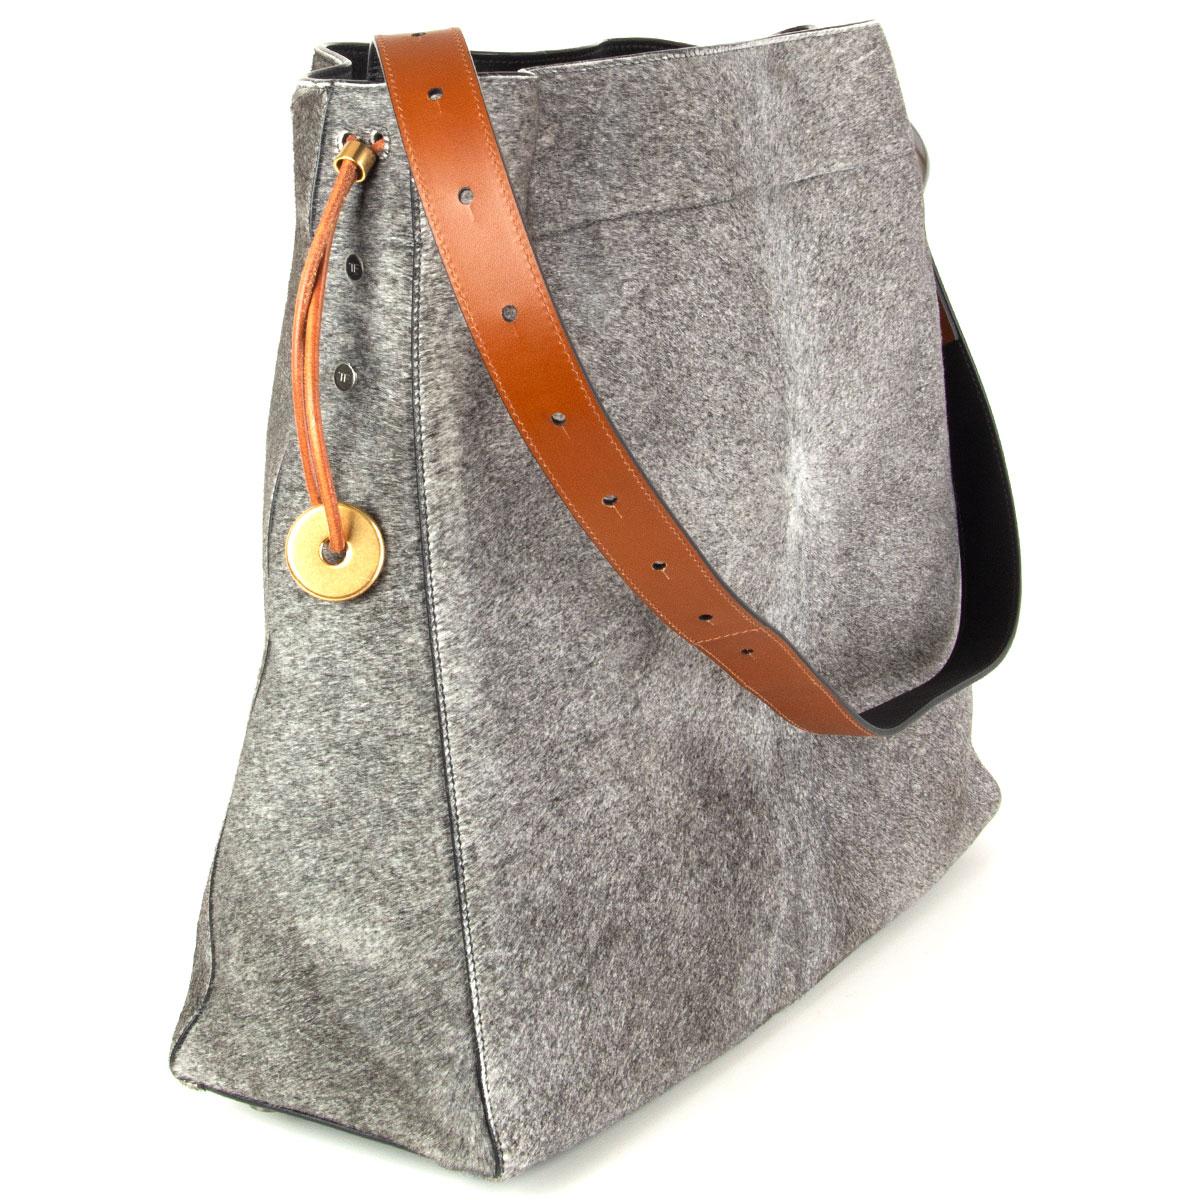 Tom Ford large hobo bag in grey calf hair with black and camel calfskin adjustable shoulder strap with gunmetal fisherman hook detail. Opens with a brown drawstring and is lined in black microfibre with one leather zip pocket and one open pocket.